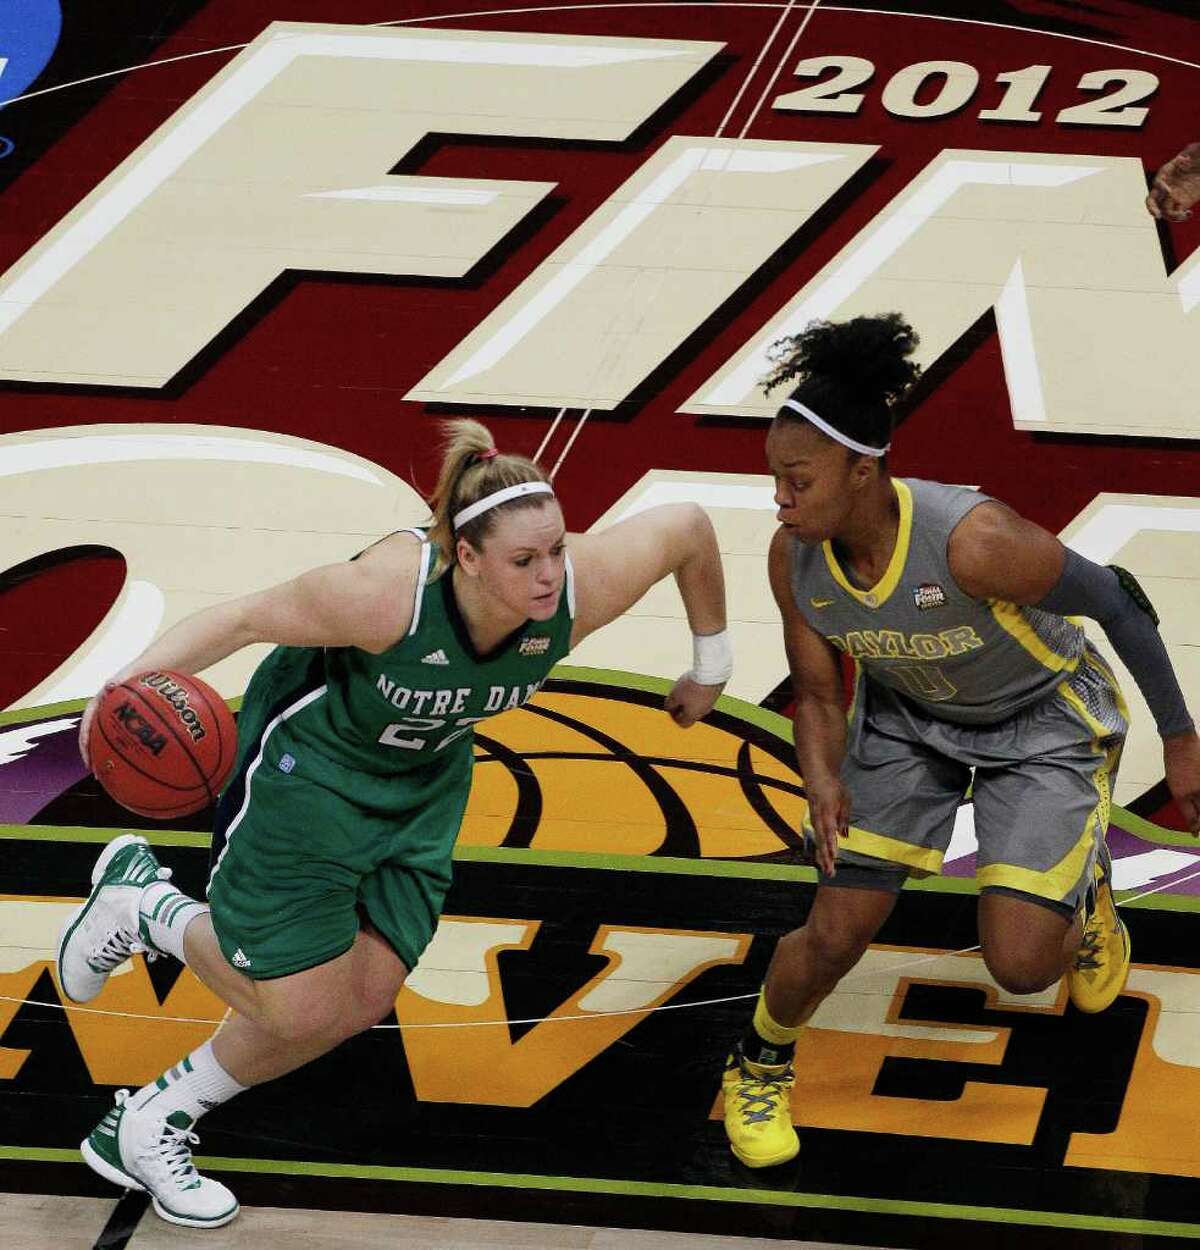 Notre Dame guard Brittany Mallory (22) drives past Baylor guard Odyssey Sims (0) during the first half in the NCAA women's Final Four college basketball championship game, in Denver, Tuesday, April 3, 2012. (AP Photo/David Zalubowski)